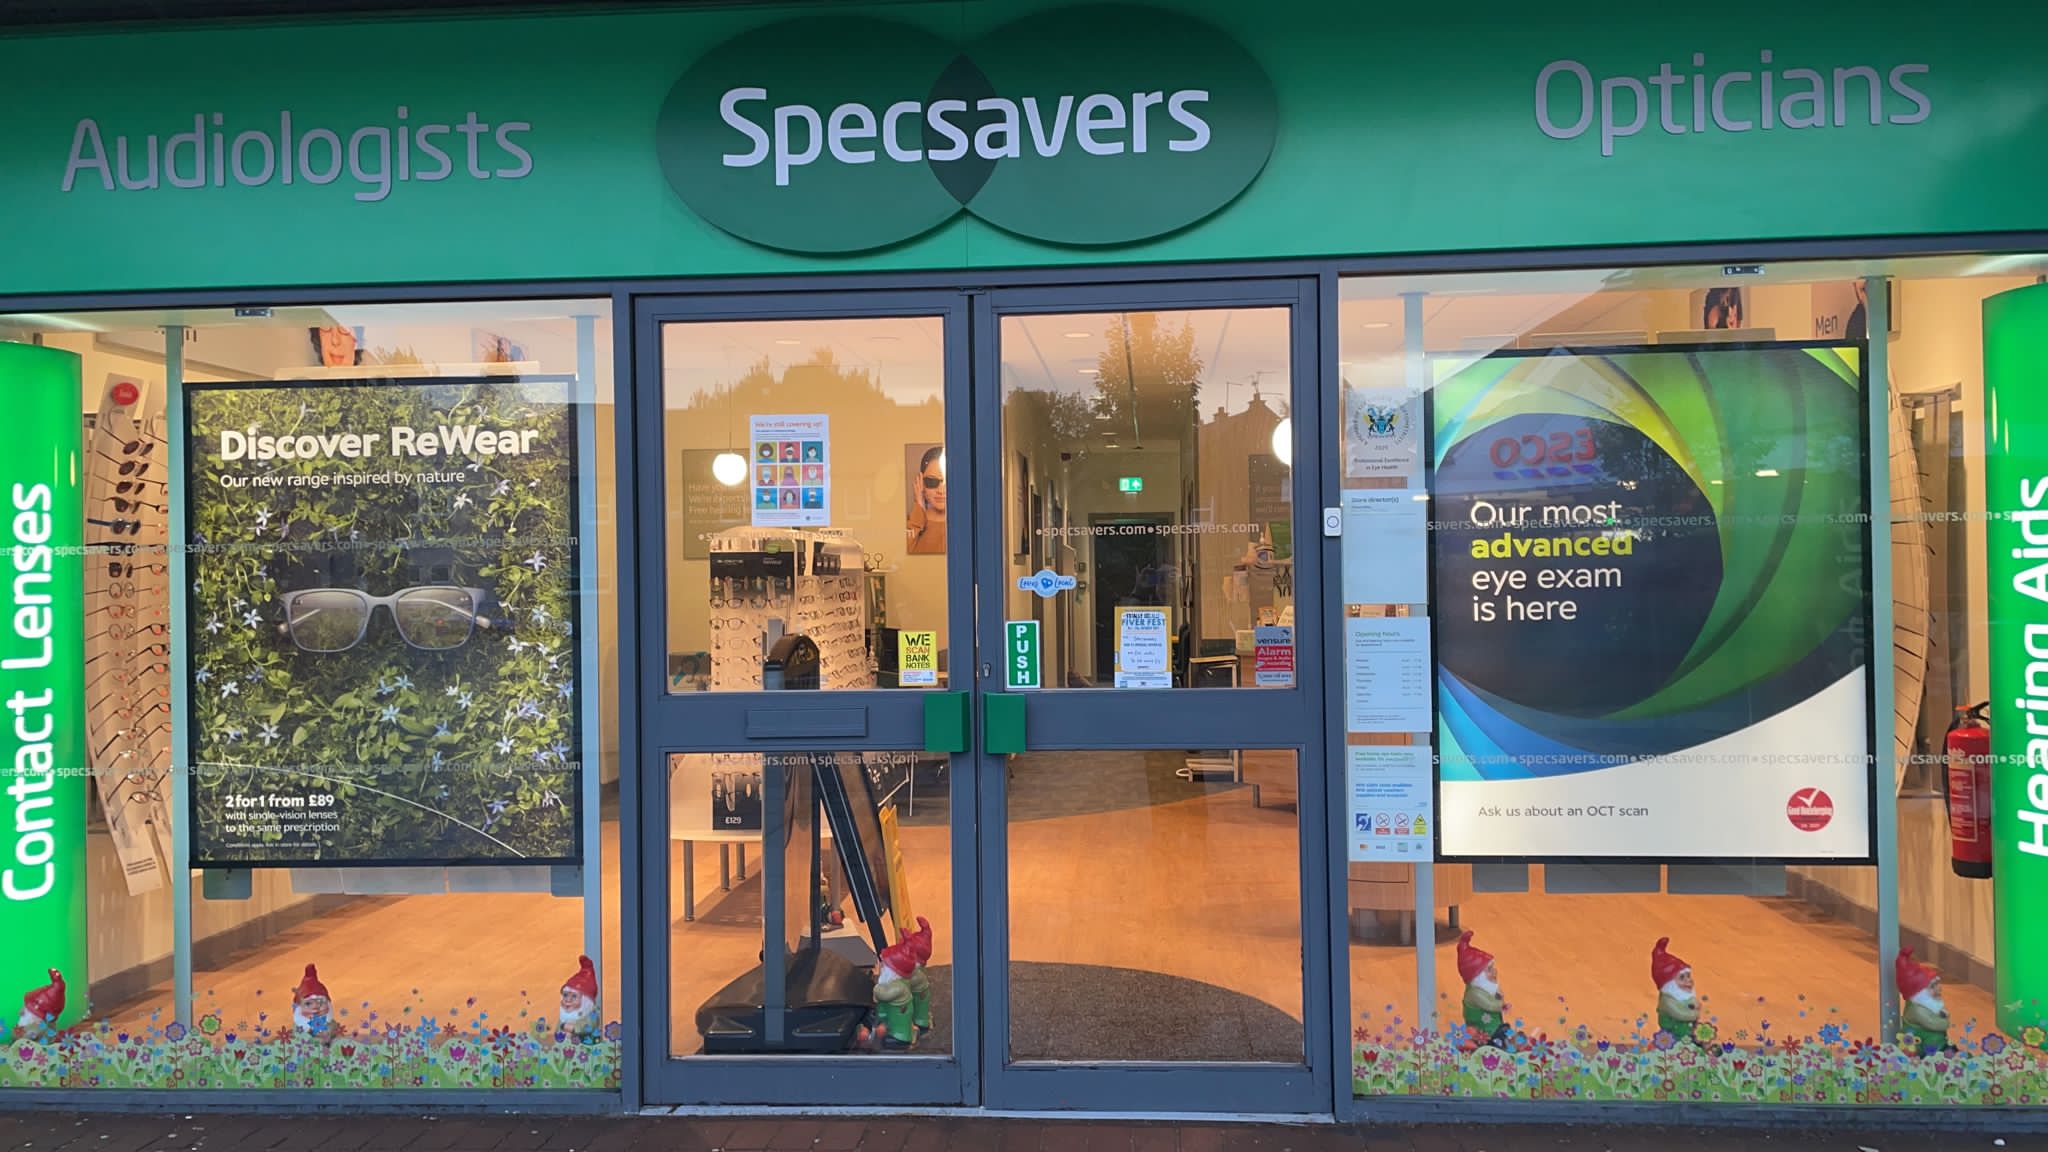 Specsavers Linlithgow store - exterior Specsavers Opticians and Audiologists - Linlithgow Linlithgow 01506 534484